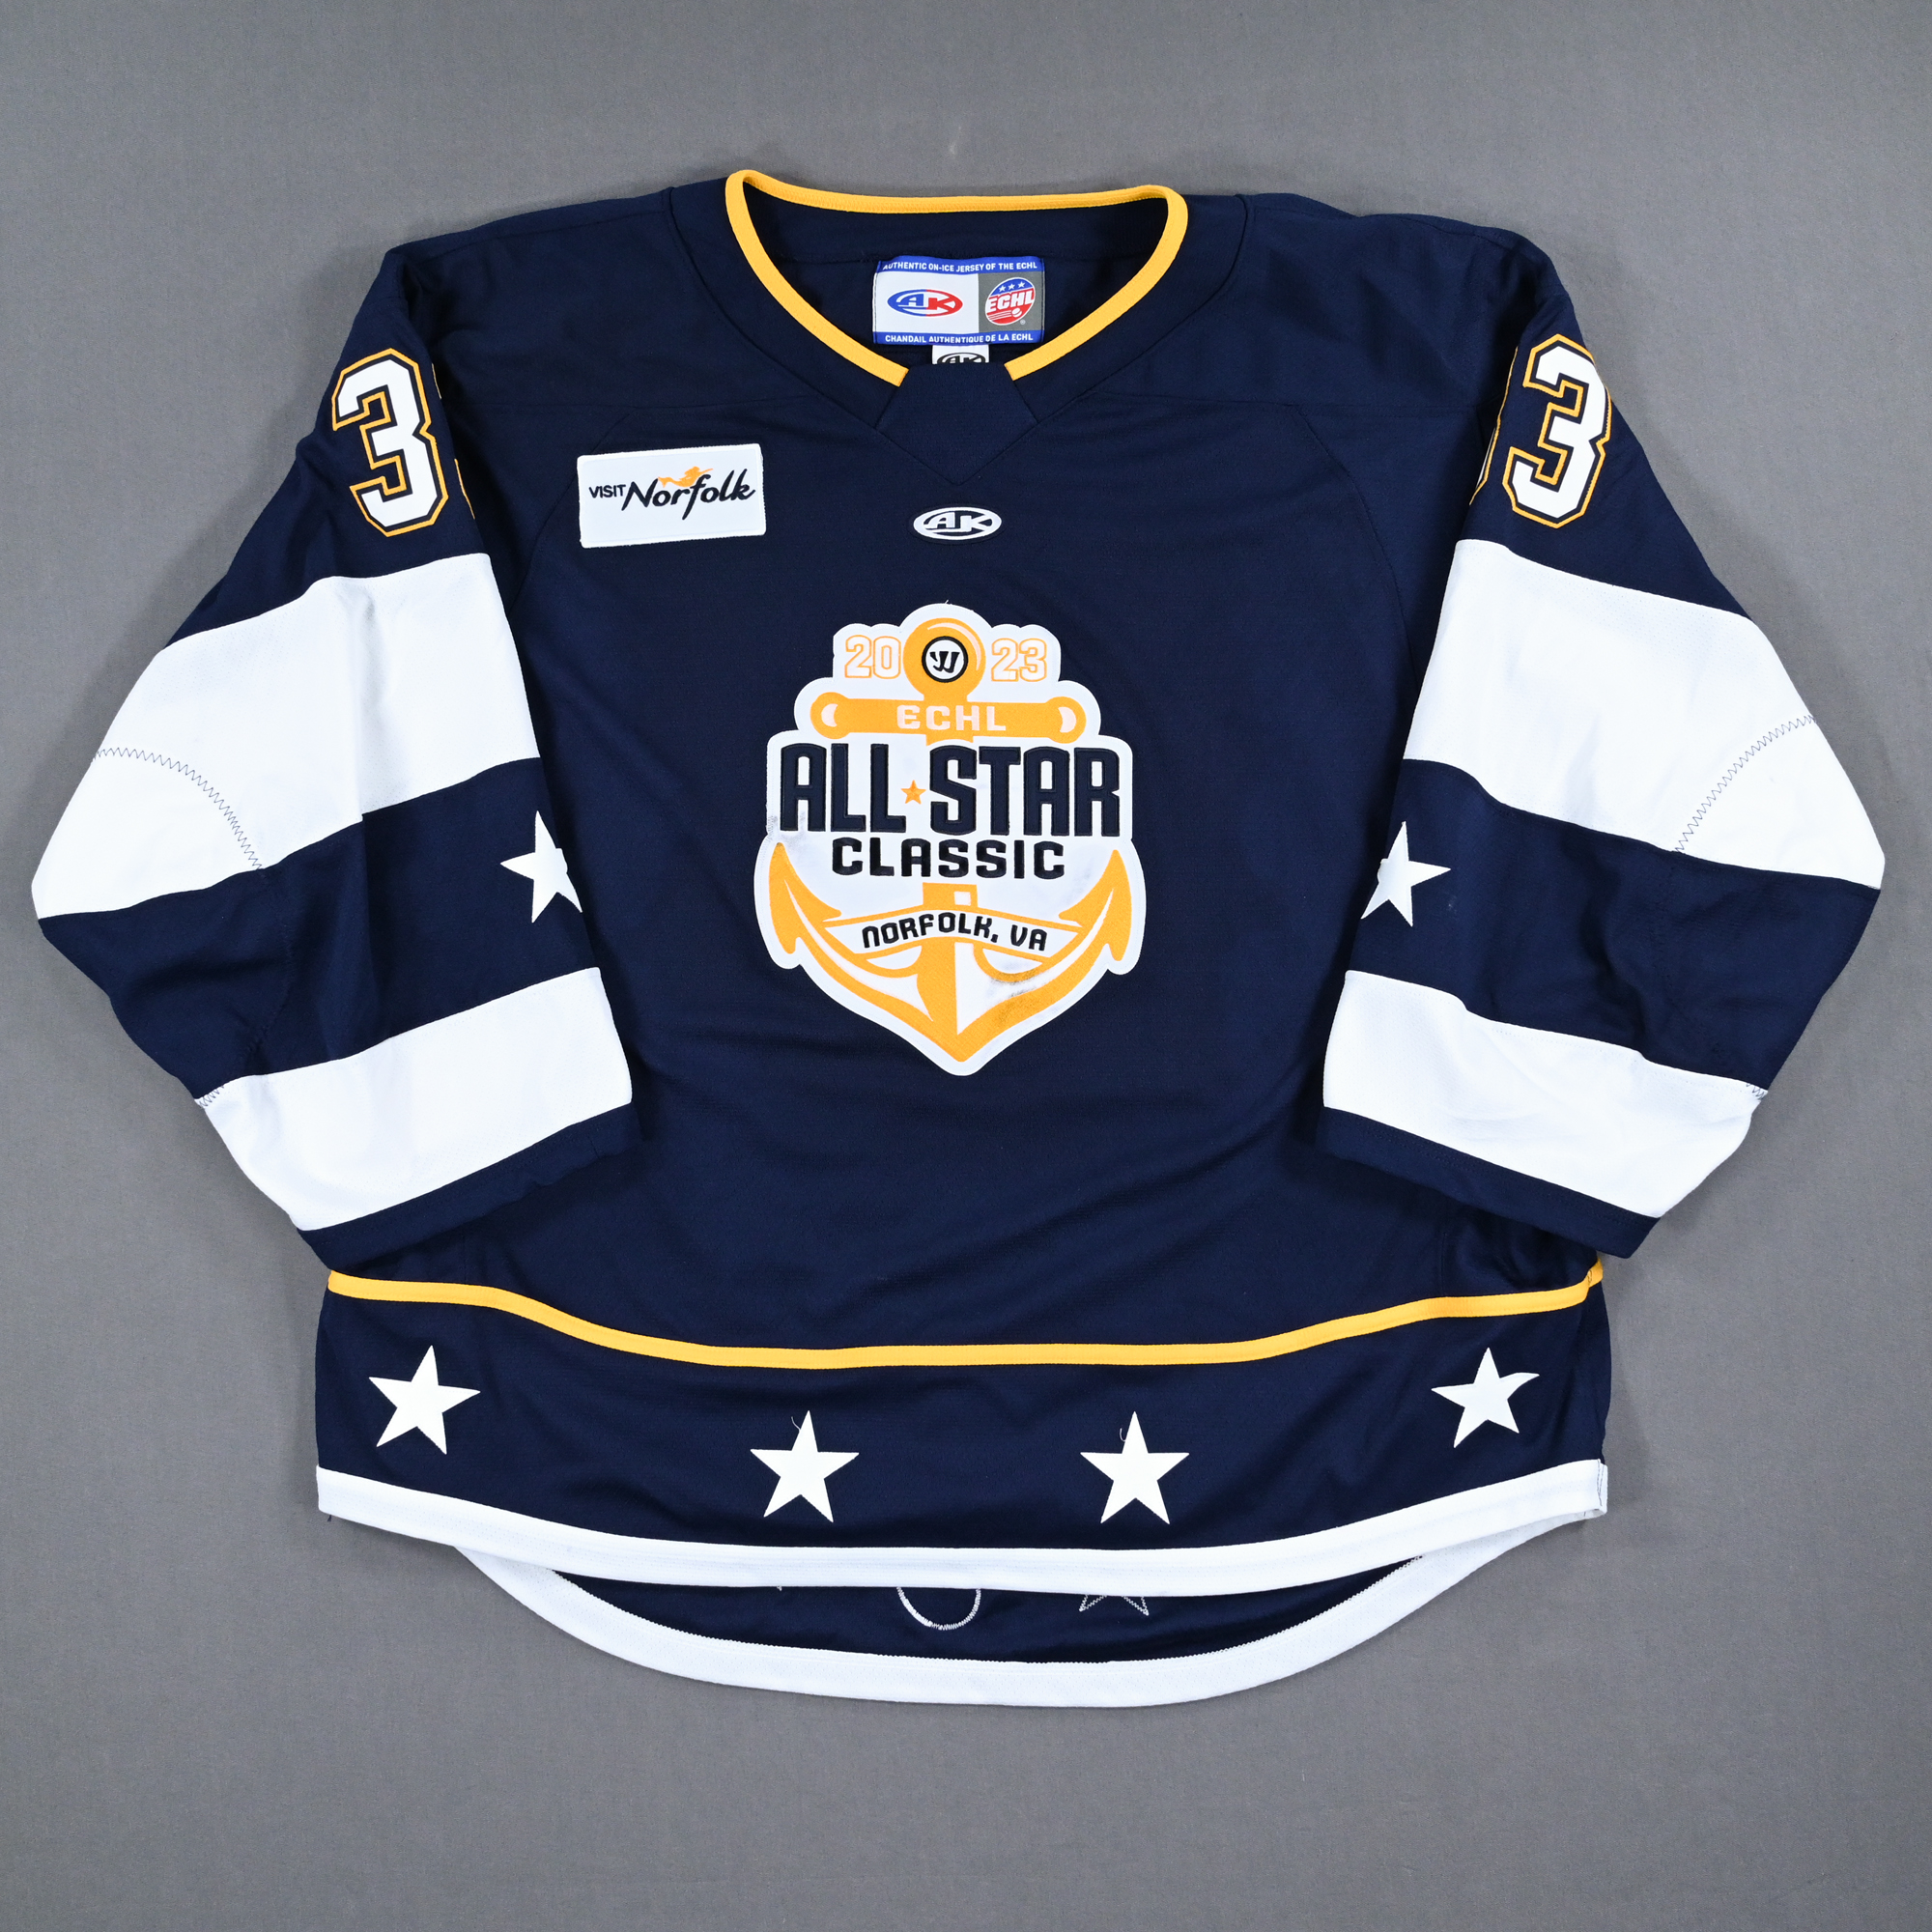 MeiGray to Auction Jerseys, Pucks from ECHL All-Star Game